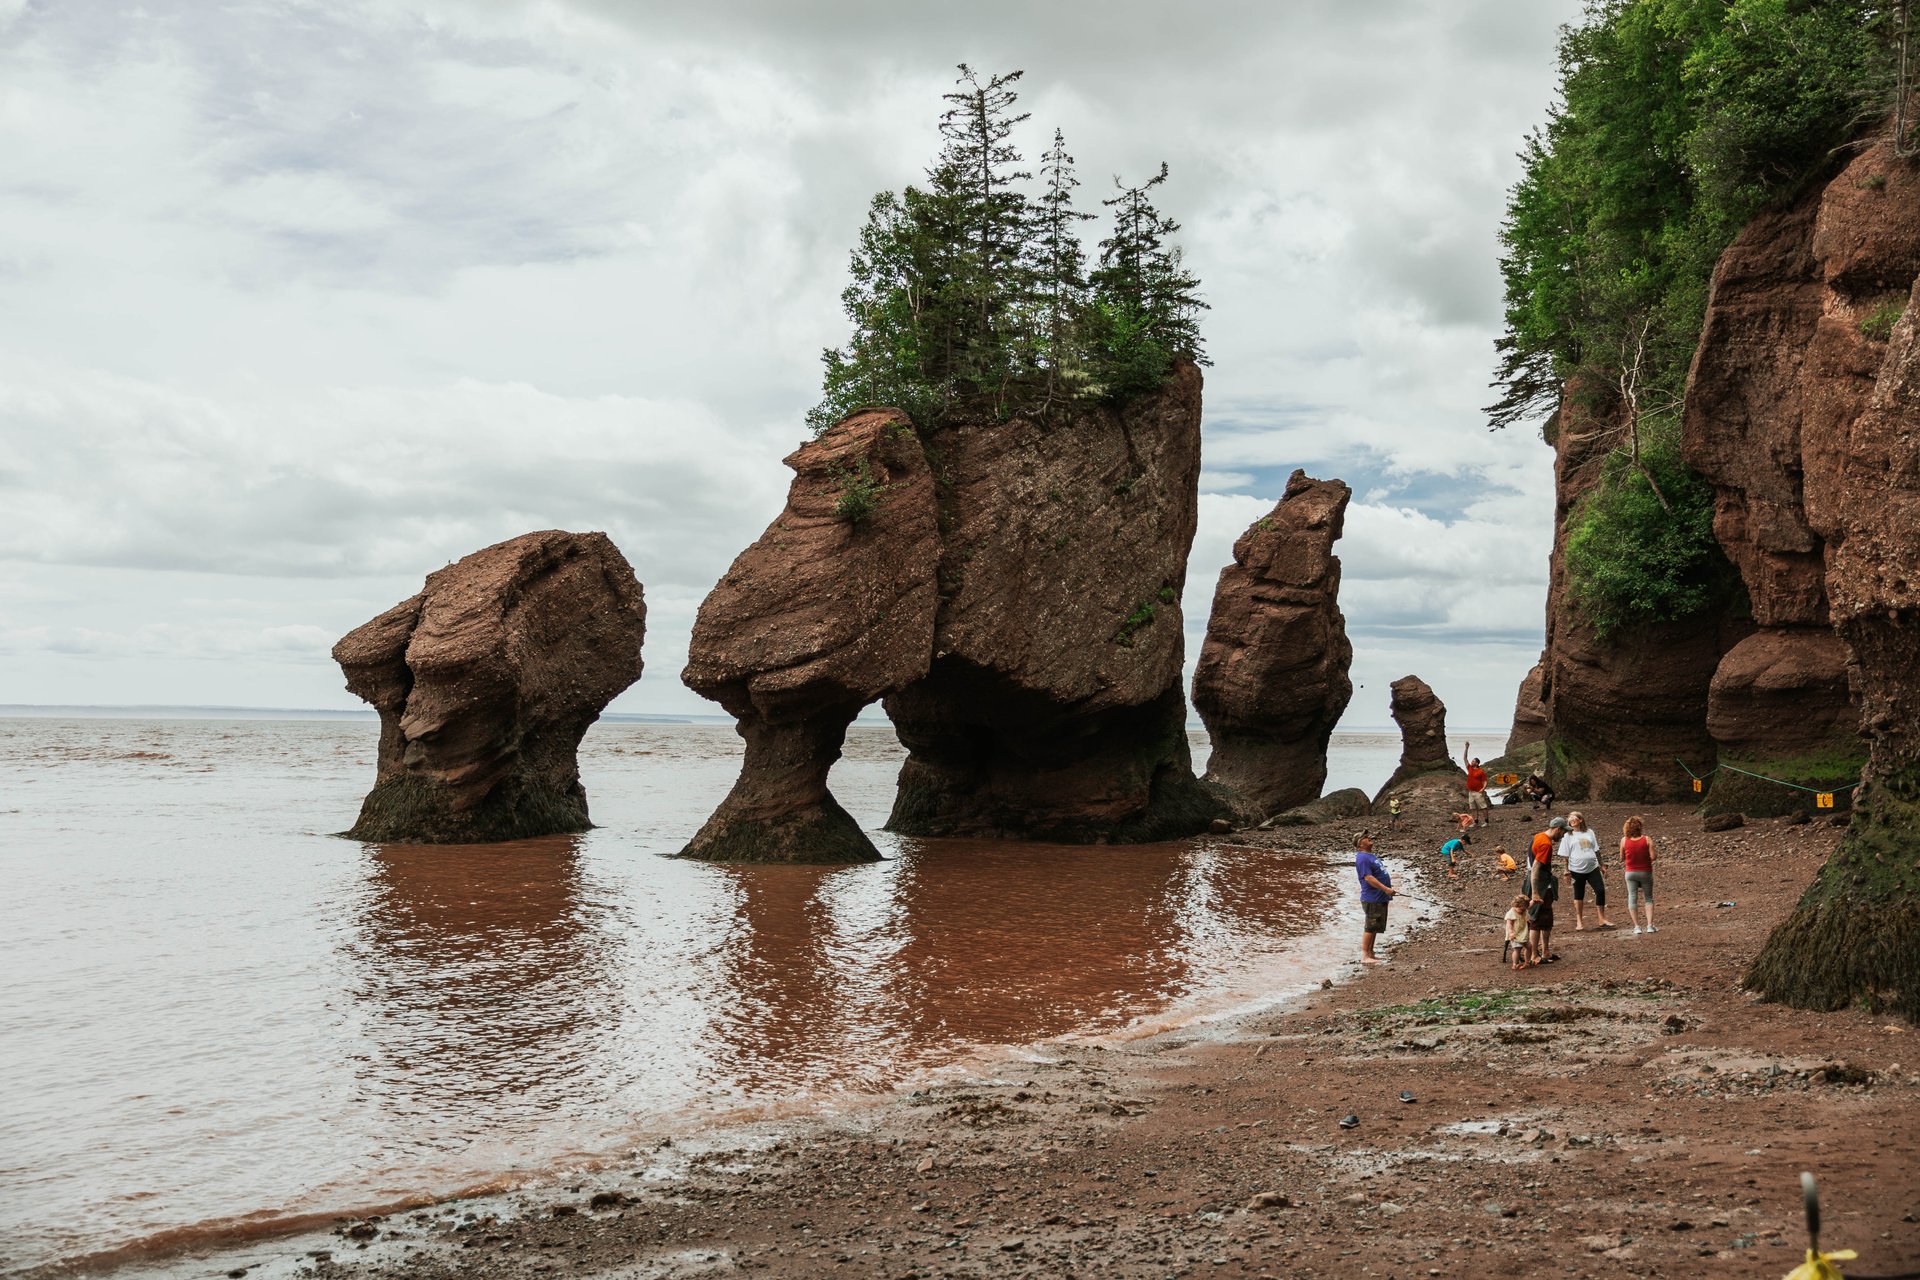 File:Bay of Fundy rock formations.jpg - Wikipedia